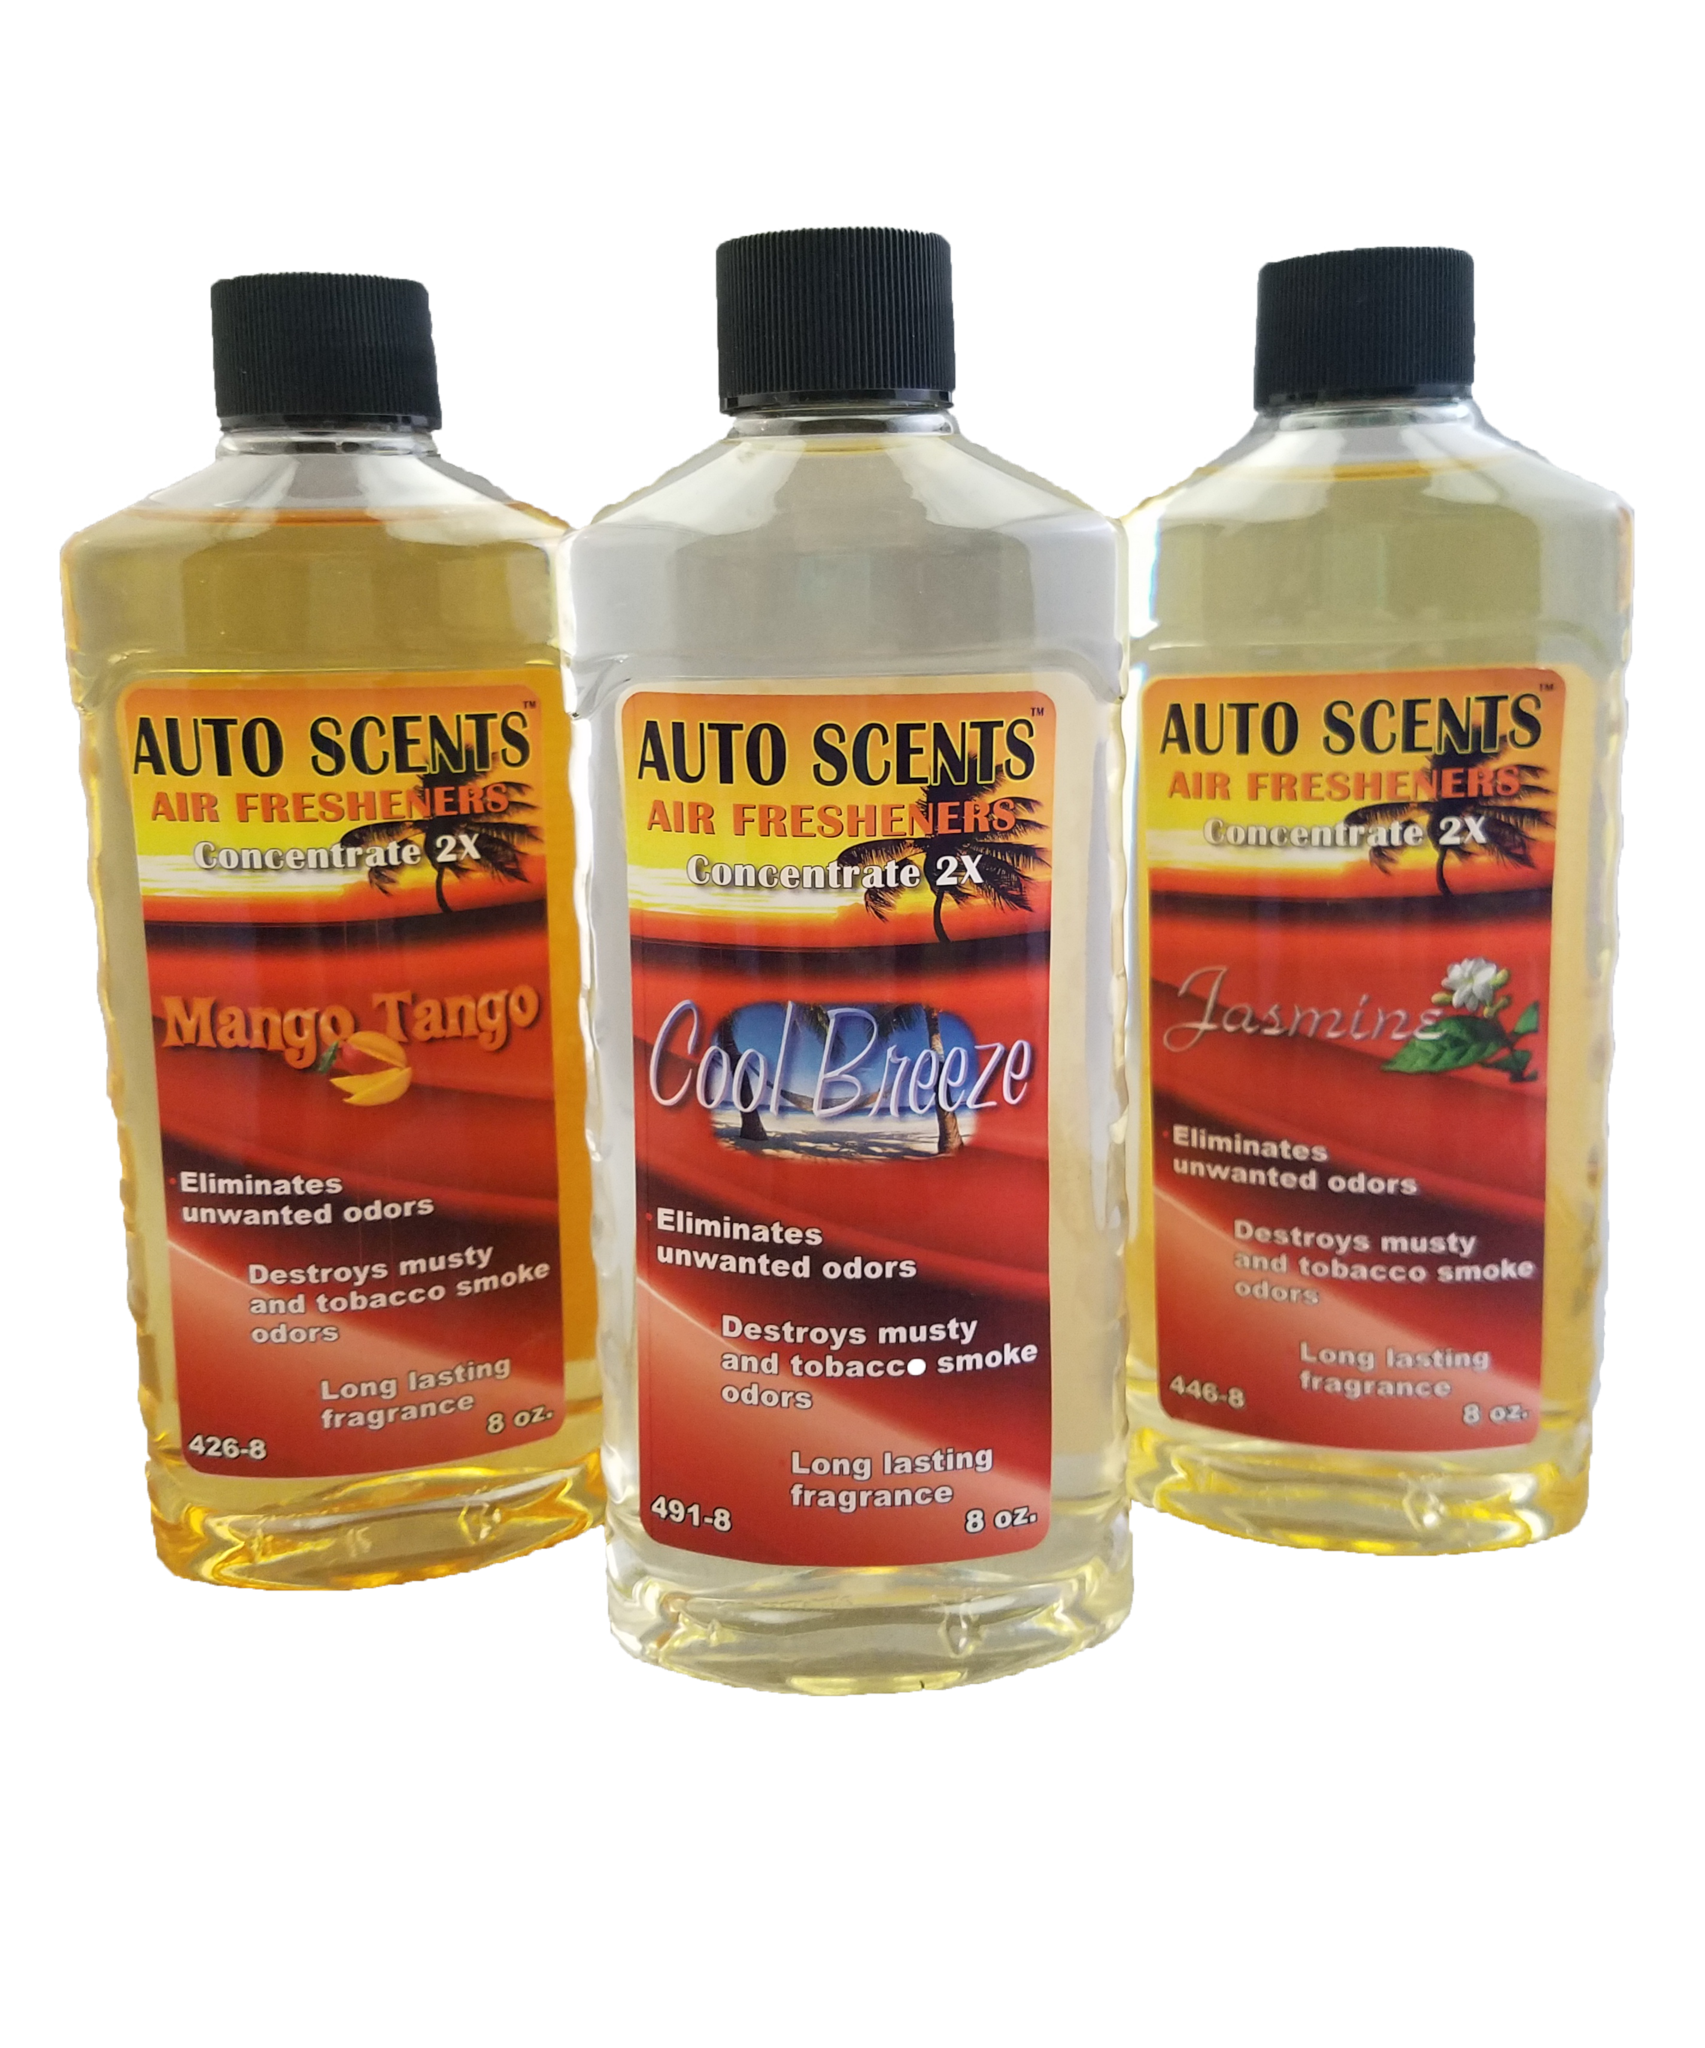 Auto Scent concentrated liquid air freshener- 8oz makes 1 to 2 gallons